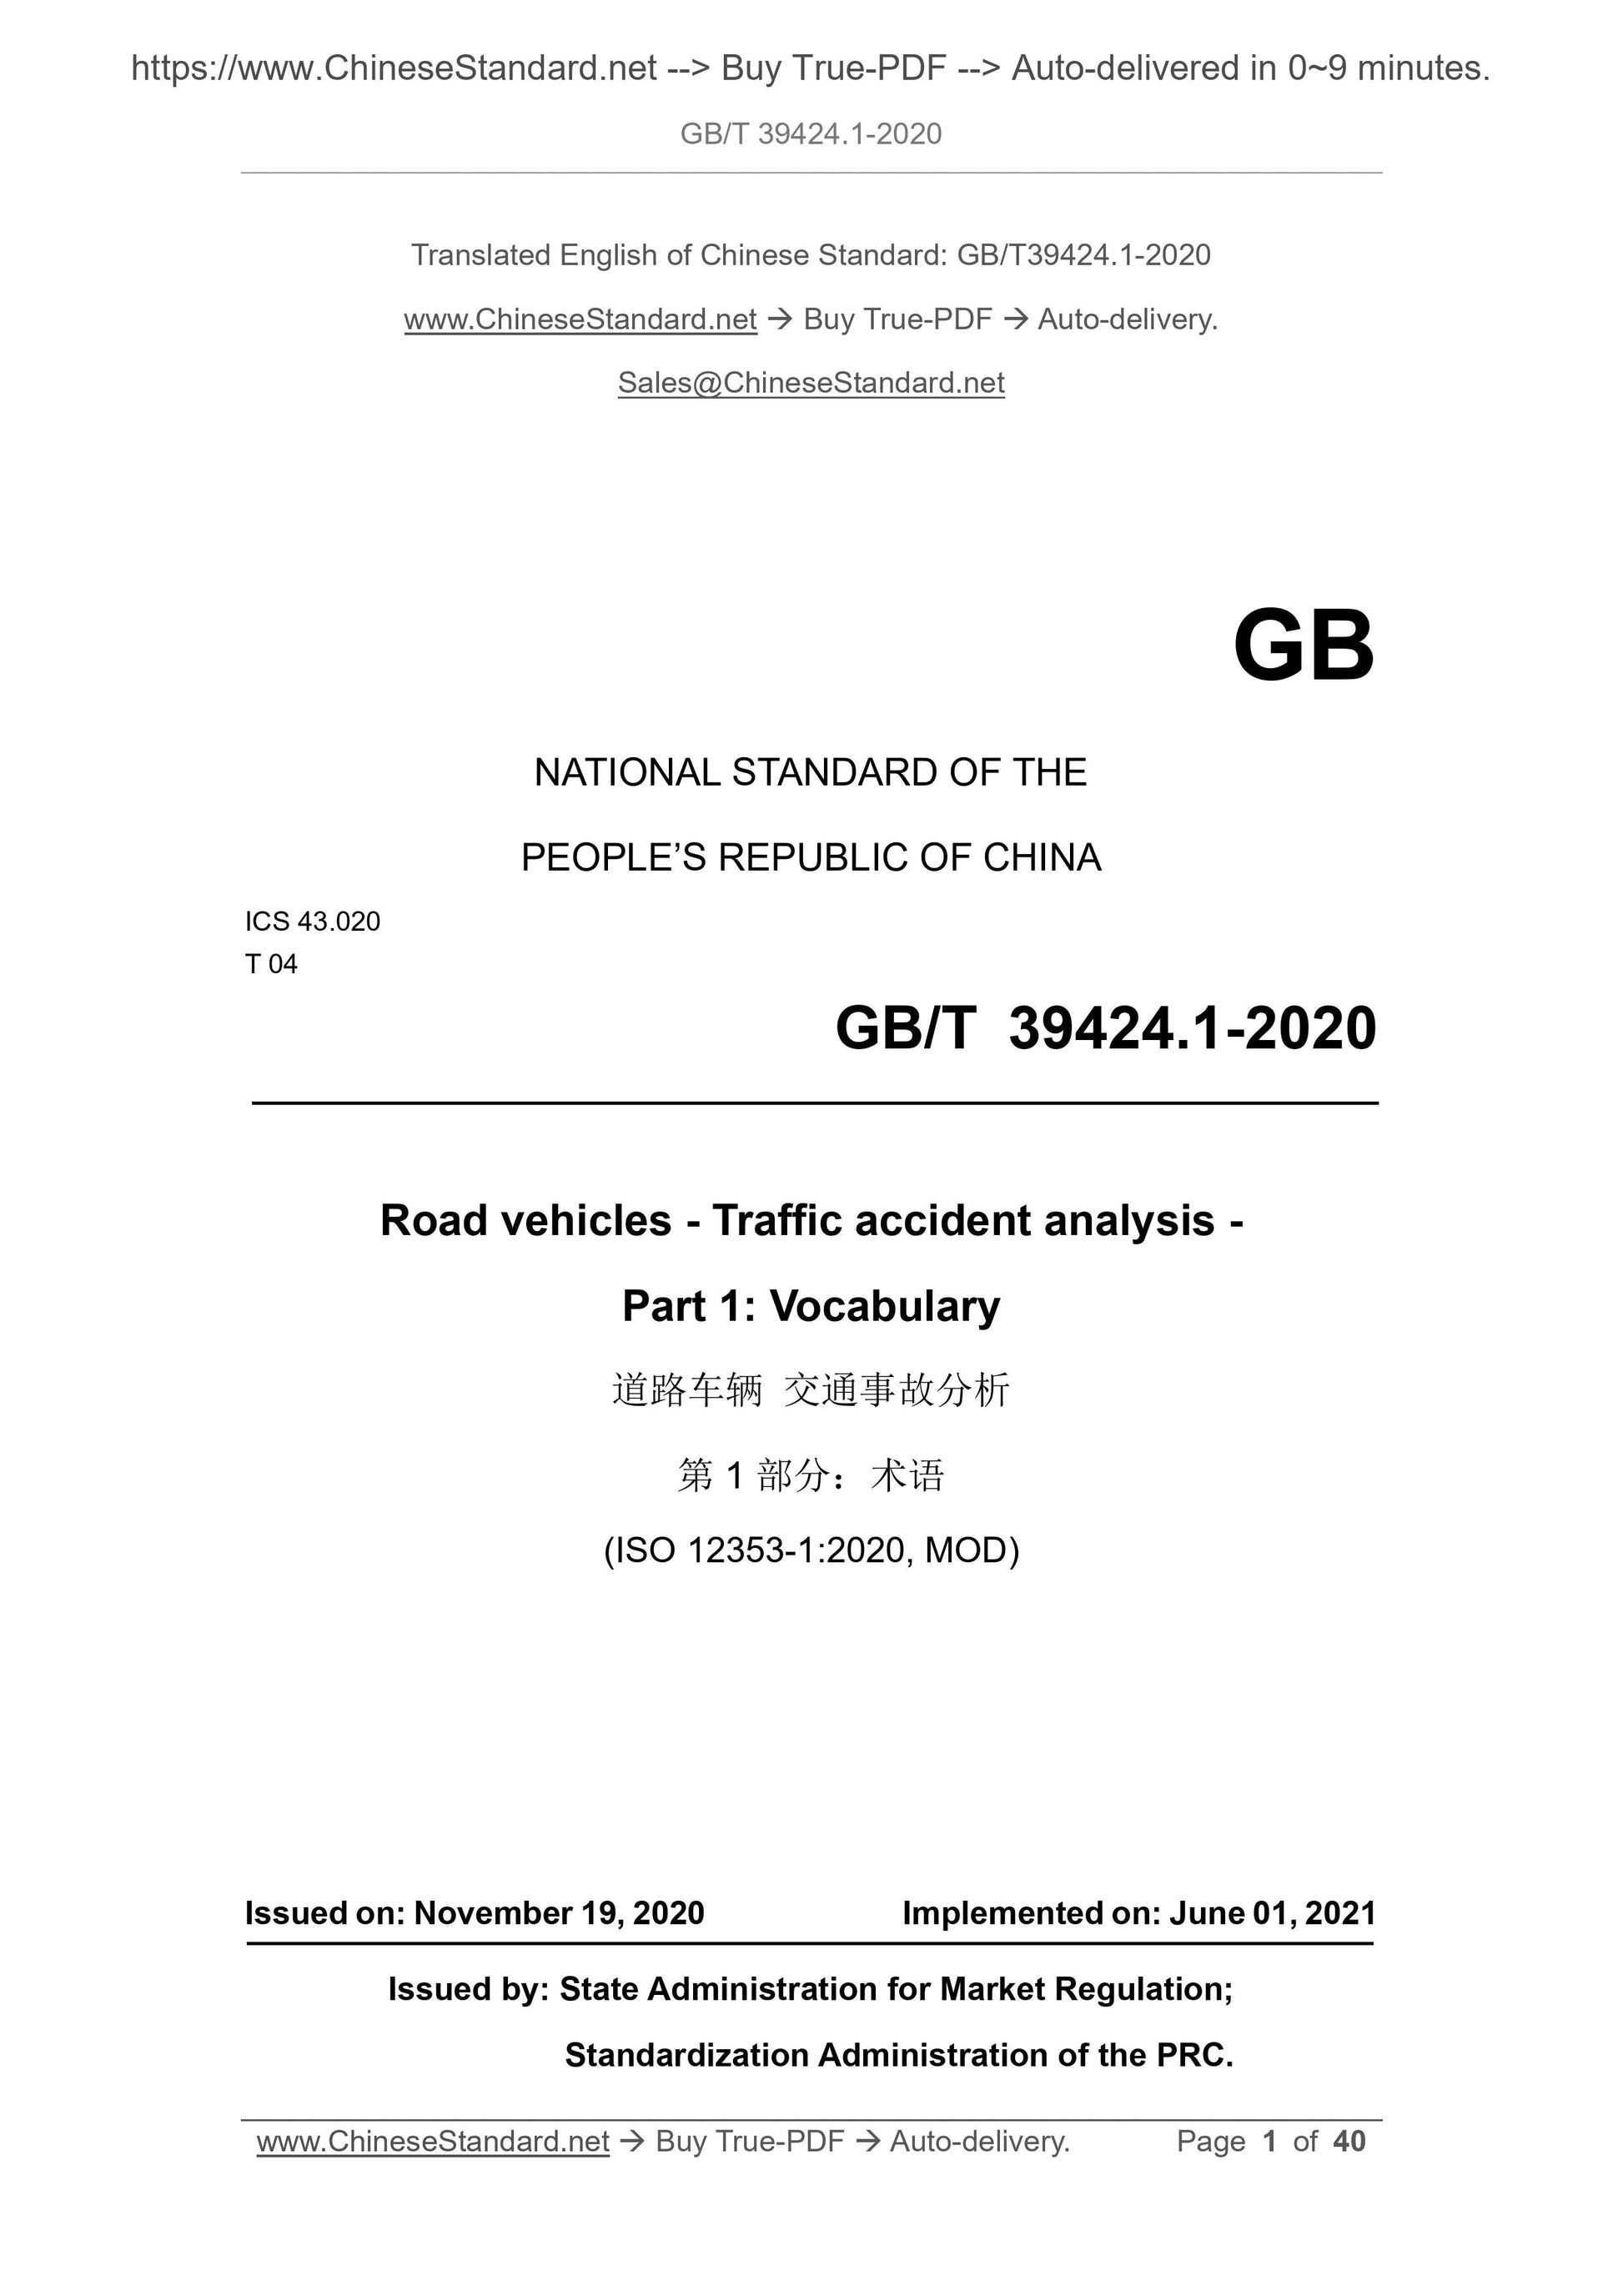 GB/T 39424.1-2020 Page 1